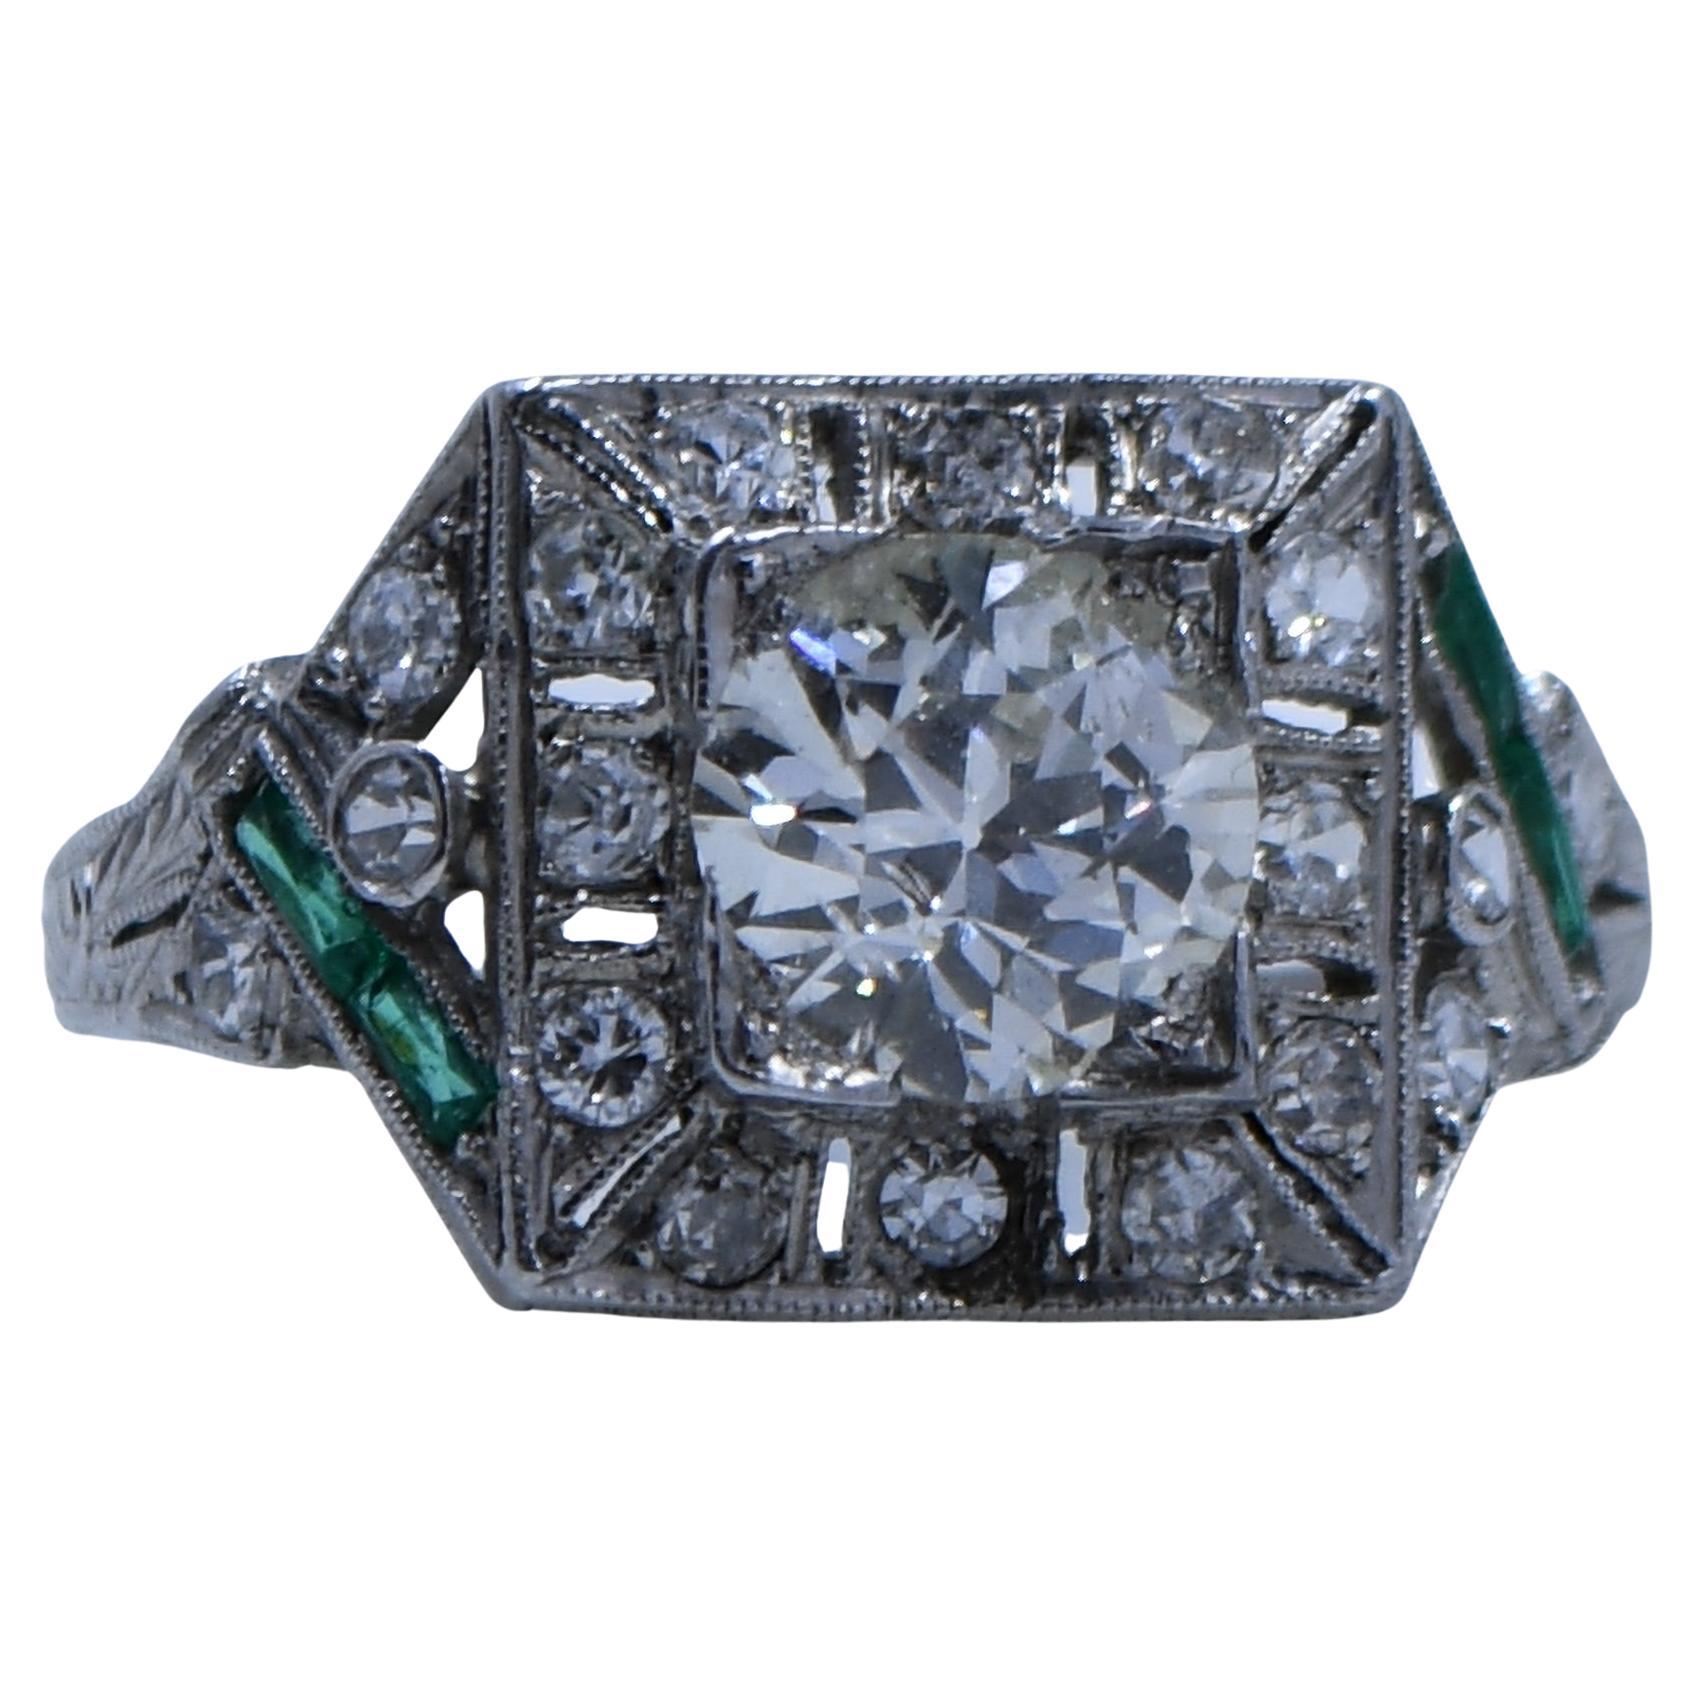 Circa 1920's Art Deco Platinum 1.26 Ct GIA Certified Diamond and Emerald Ring For Sale